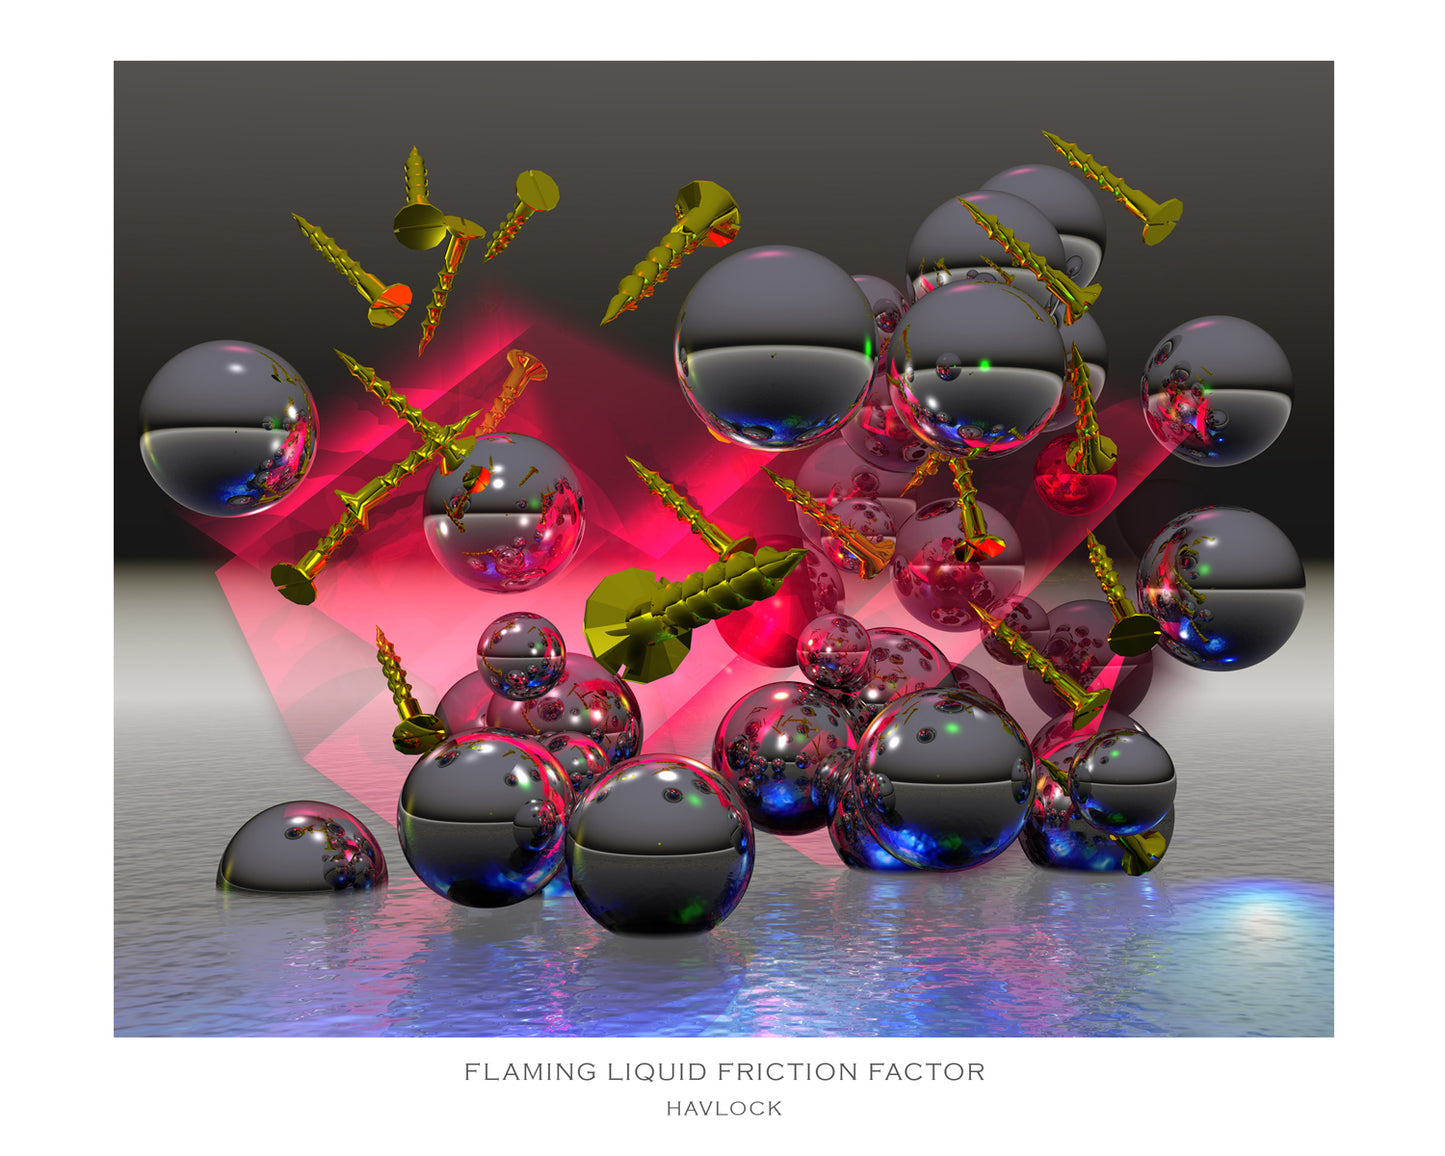 Flaming Liquid Friction Factor ~ Liquid Geometry - 8x10 Print in Collector's Sleeve